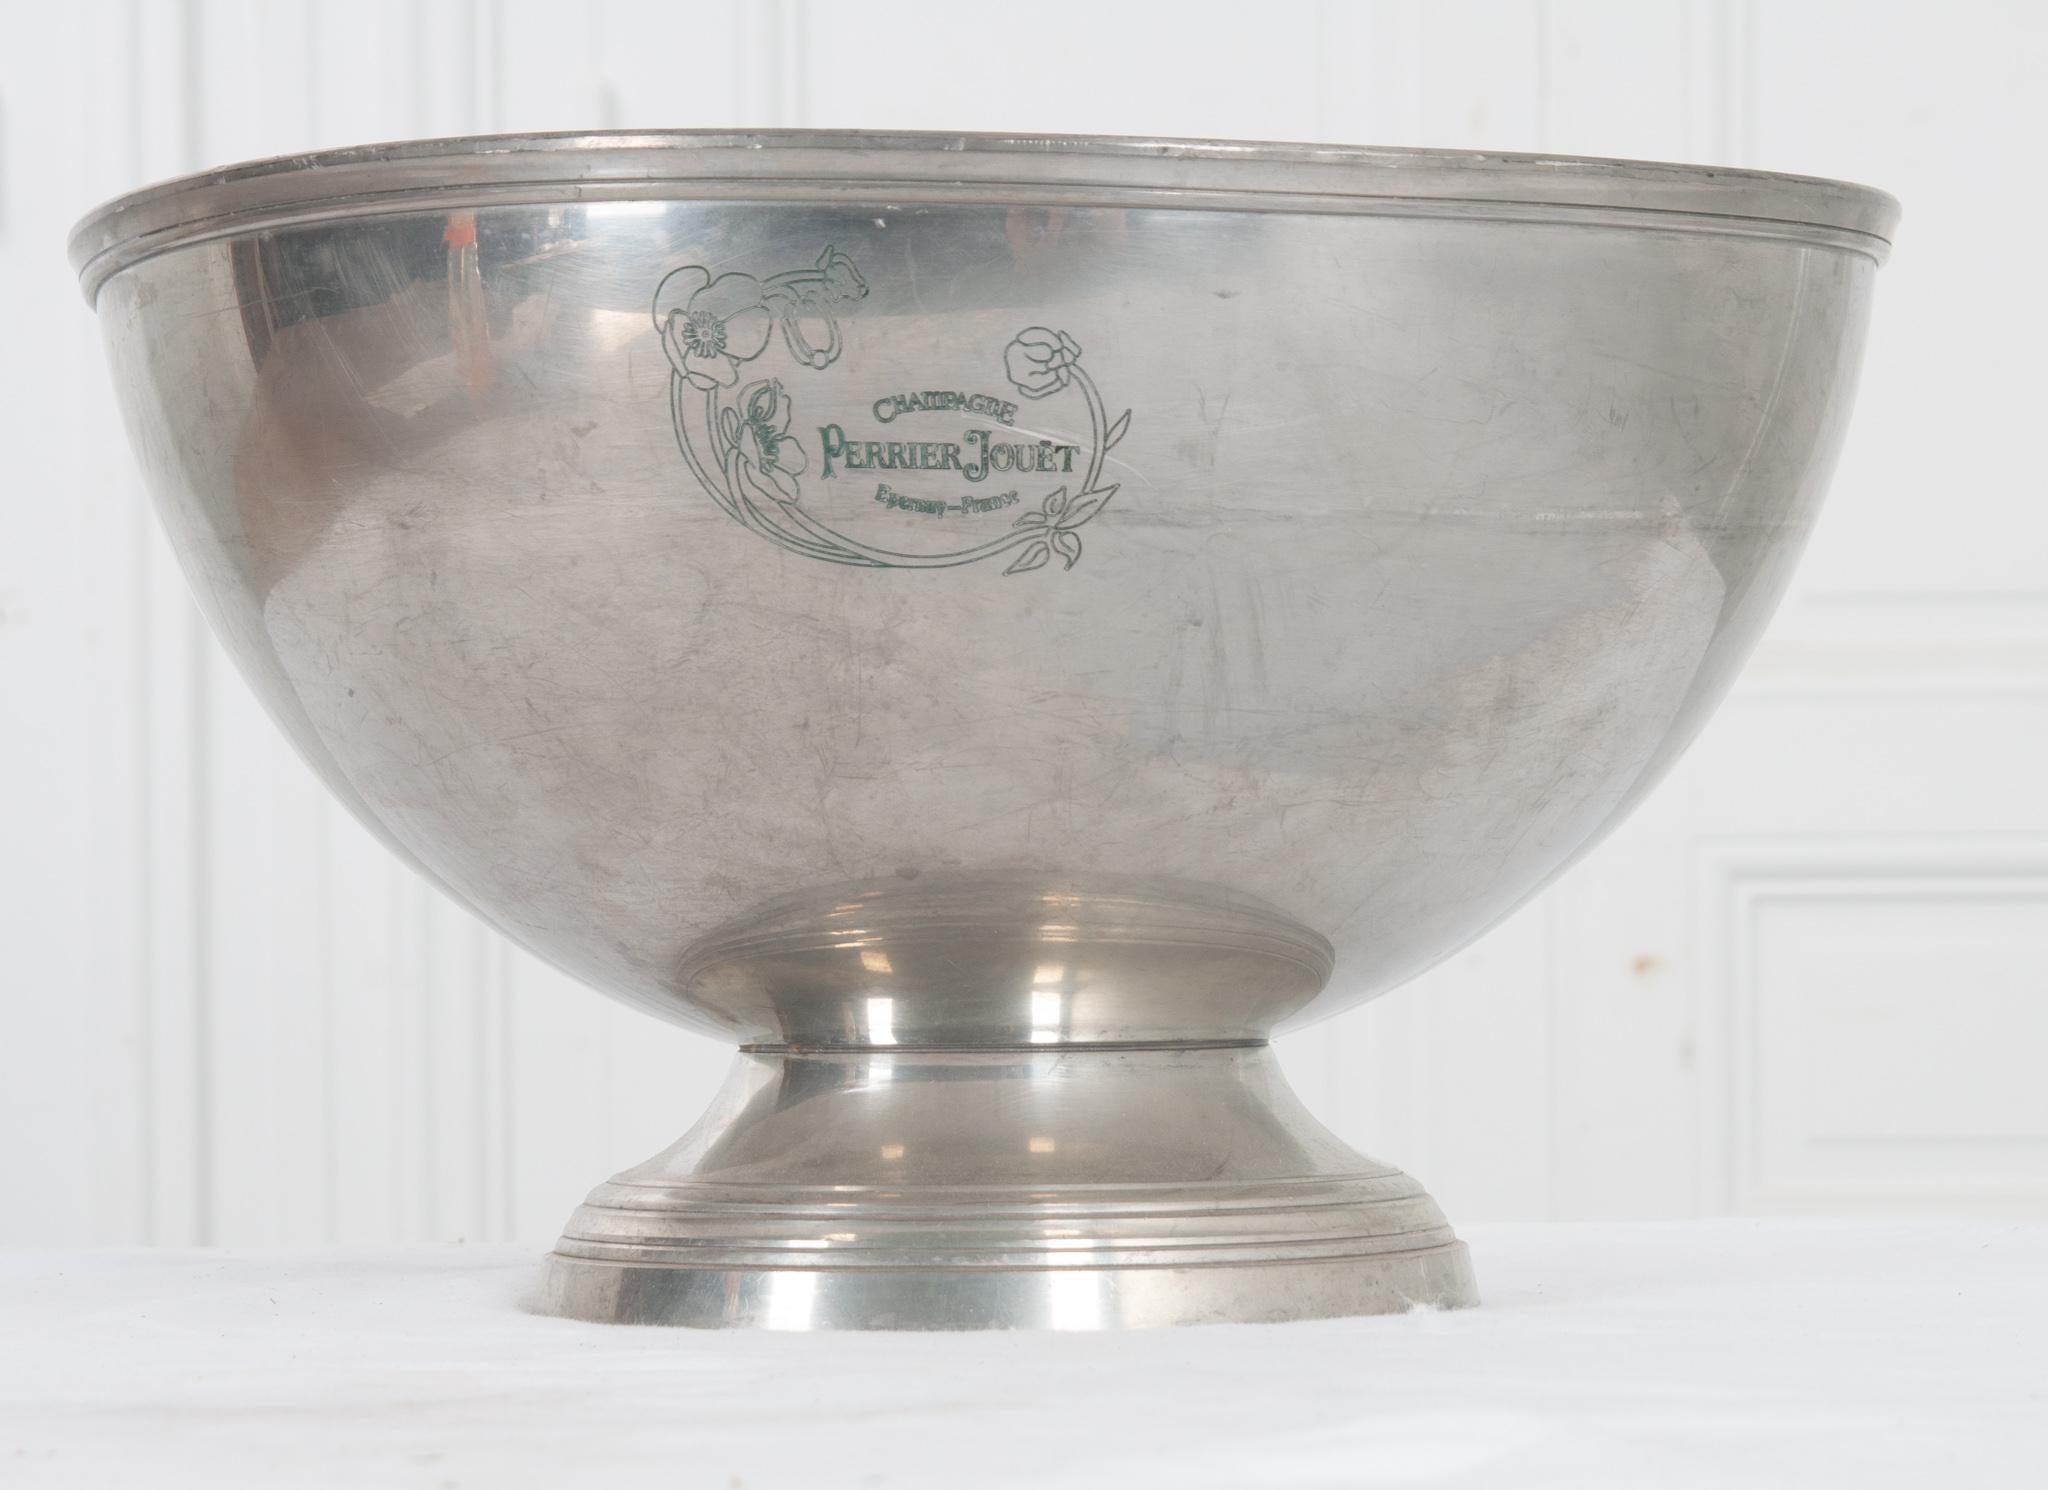 A very well made nickel finish Champagne cooler made in Italy for the French producer, Perrier Jouet. With ample size and good weight, this cooler was produced for the professional restaurant market. Inscribed front and back with, 